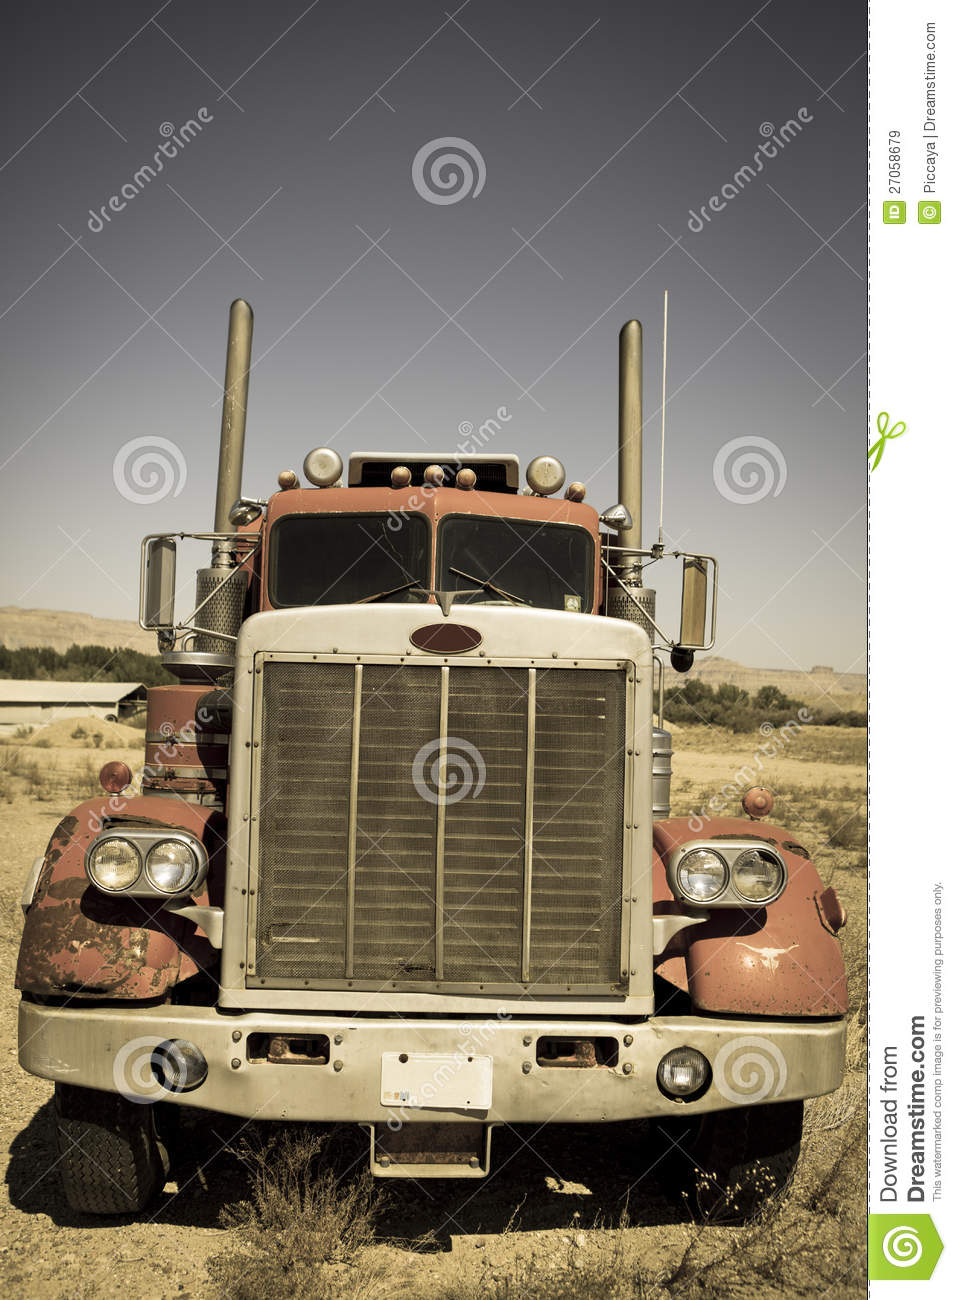 Old Rusty Truck Abandoned Royalty Free Stock Images   Image  27058679